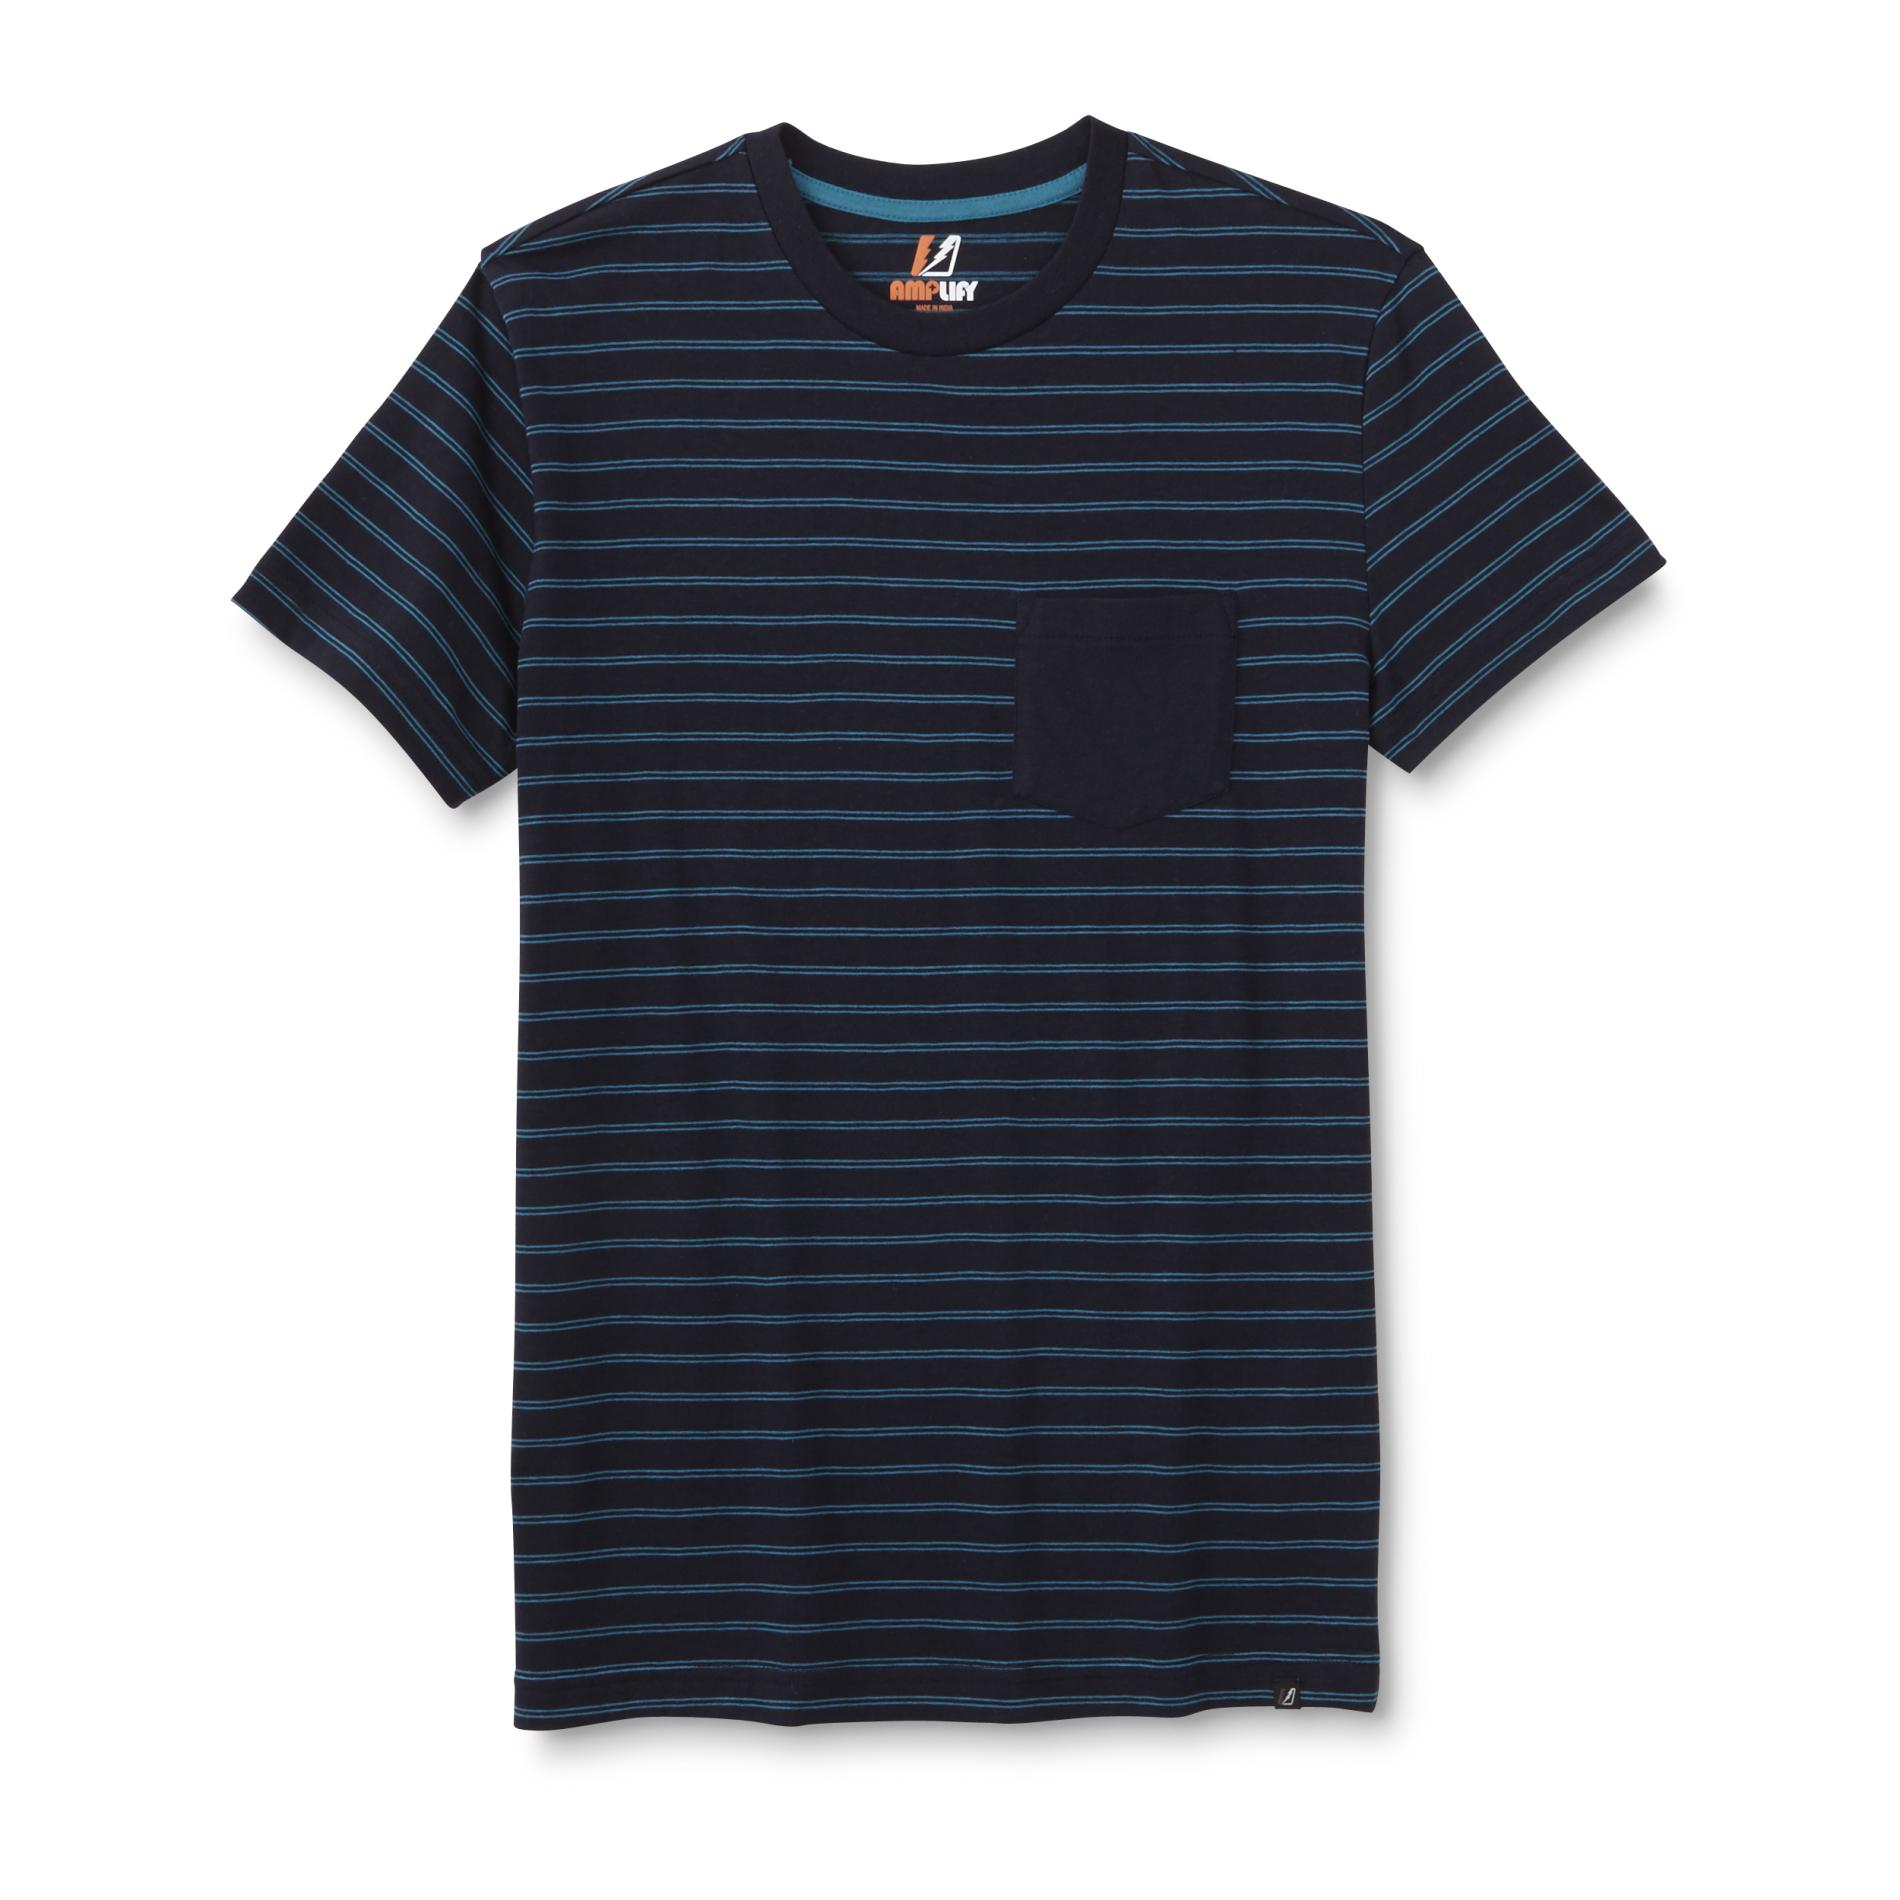 Amplify Young Men's Pocket T-Shirt - Striped